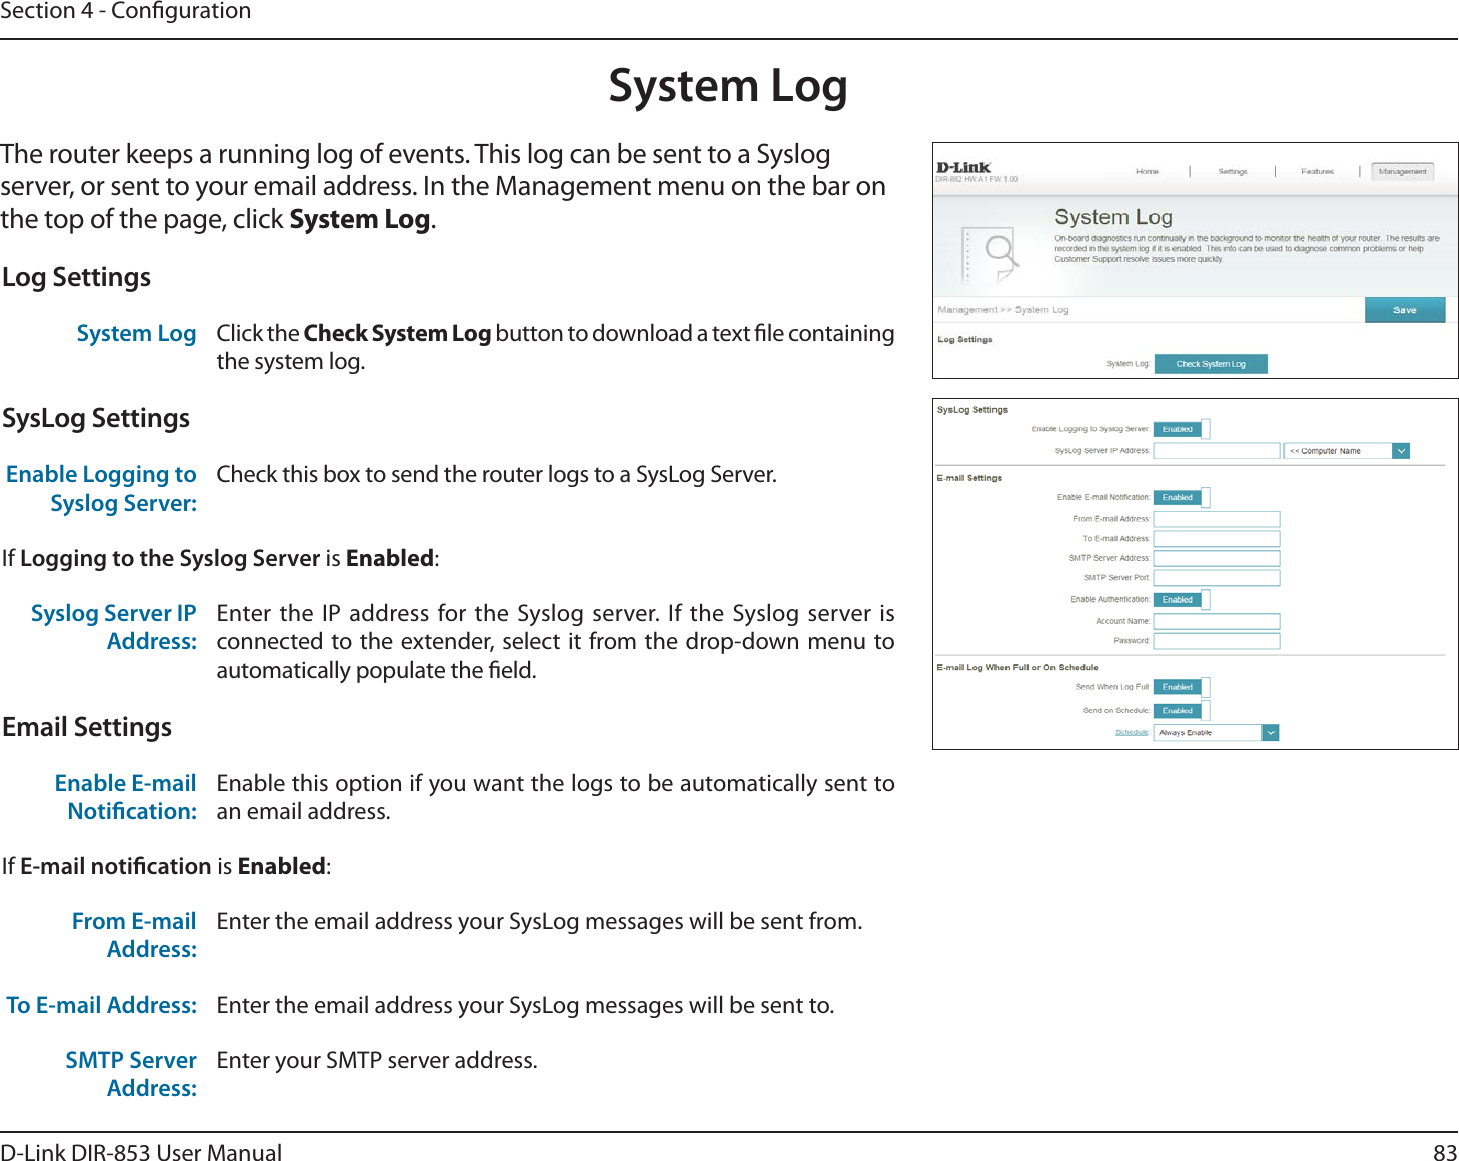 83D-Link DIR-853 User ManualSection 4 - CongurationSystem LogThe router keeps a running log of events. This log can be sent to a Syslog server, or sent to your email address. In the Management menu on the bar on the top of the page, click System Log. Log SettingsSystem Log Click the Check System Log button to download a text le containing the system log.SysLog SettingsEnable Logging to Syslog Server:Check this box to send the router logs to a SysLog Server. If Logging to the Syslog Server is Enabled:Syslog Server IP Address:Enter the IP address for the Syslog server. If the Syslog server is connected to the extender, select it from the drop-down menu to automatically populate the eld. Email SettingsEnable E-mail Notication:Enable this option if you want the logs to be automatically sent to an email address.If E-mail notication is Enabled:From E-mail Address:Enter the email address your SysLog messages will be sent from.To E-mail Address: Enter the email address your SysLog messages will be sent to.SMTP Server Address:Enter your SMTP server address.